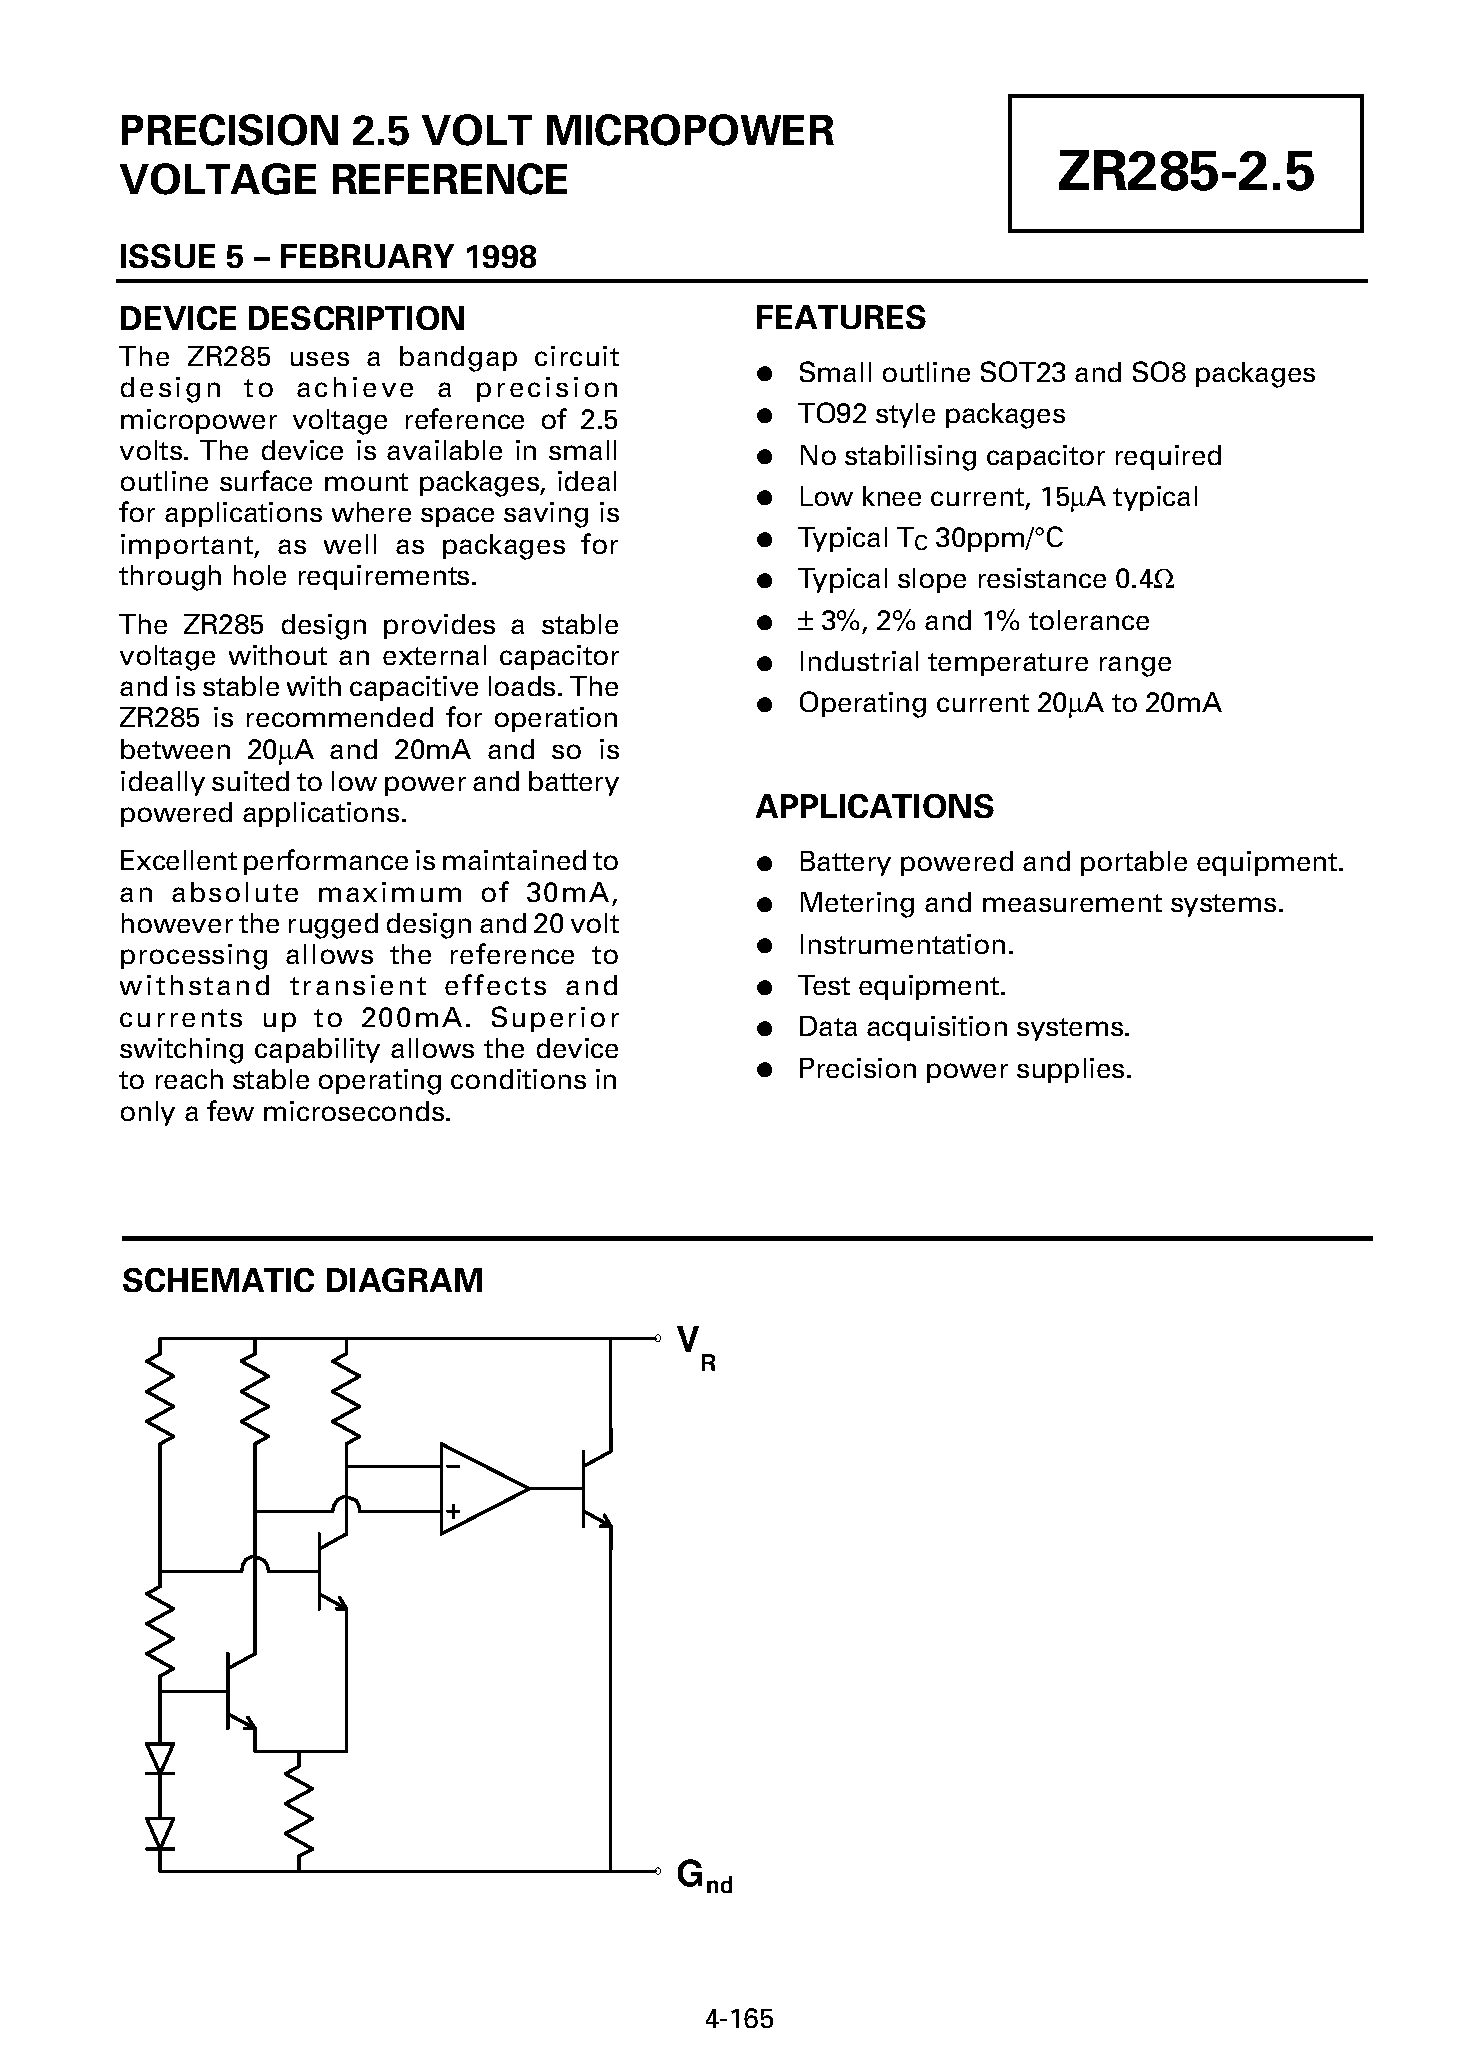 Datasheet ZR285Y03 - PRECISION 2.5 VOLT MICROPOWER VOLTAGE REFERENCE page 1